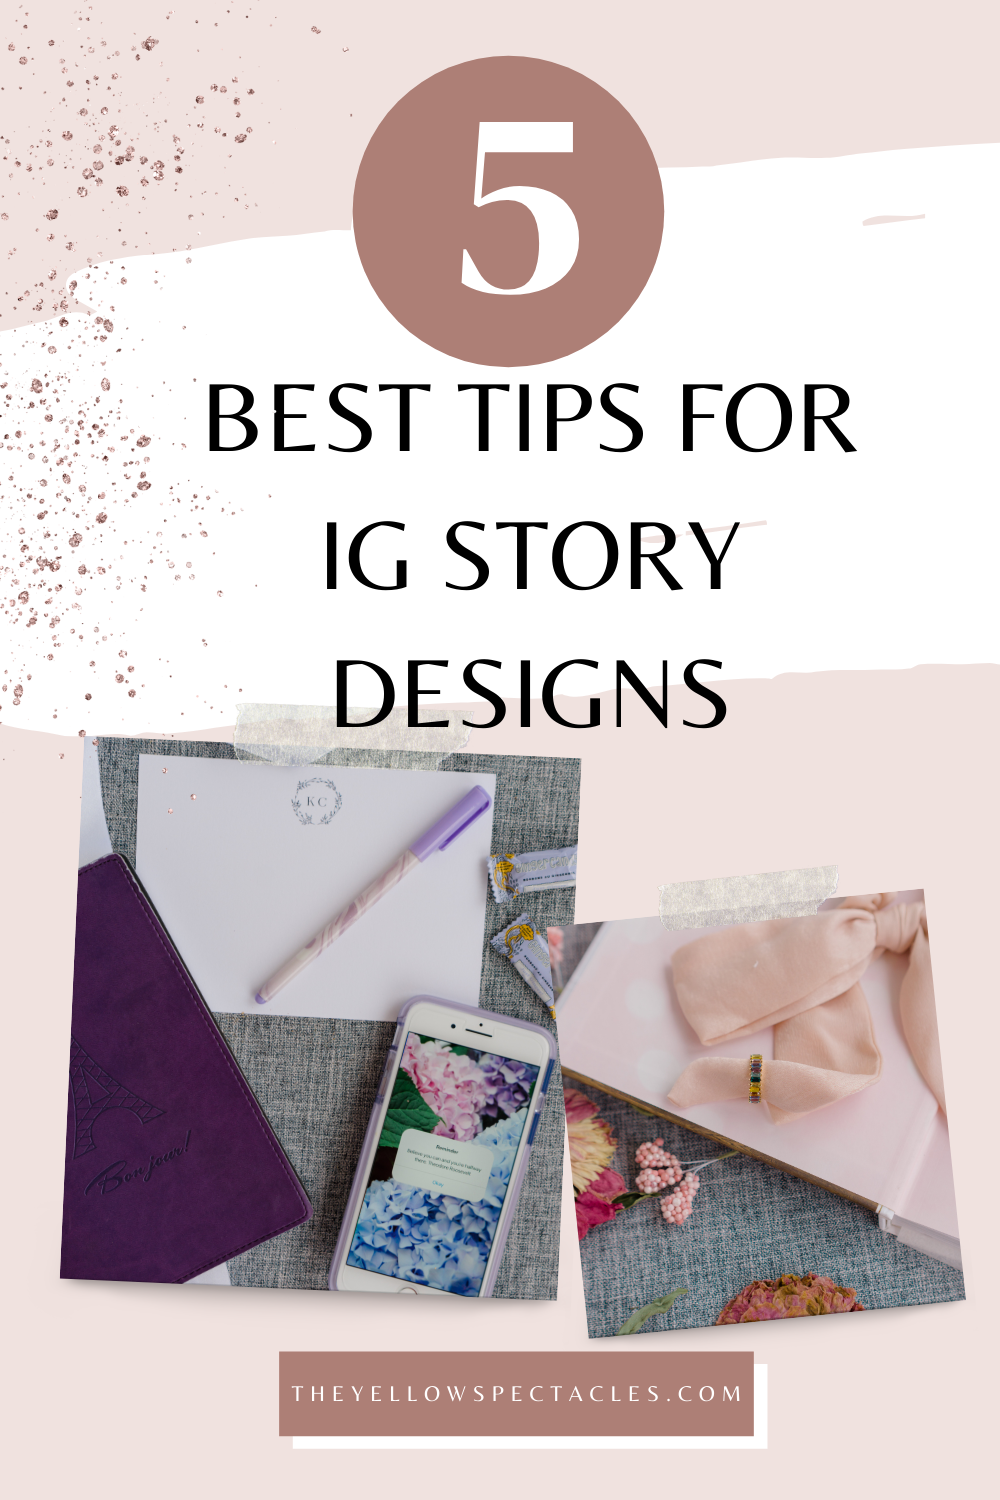 Five Tips to Creating Aesthetically Consistent Instagram Stories @Katelynchef on Instagram